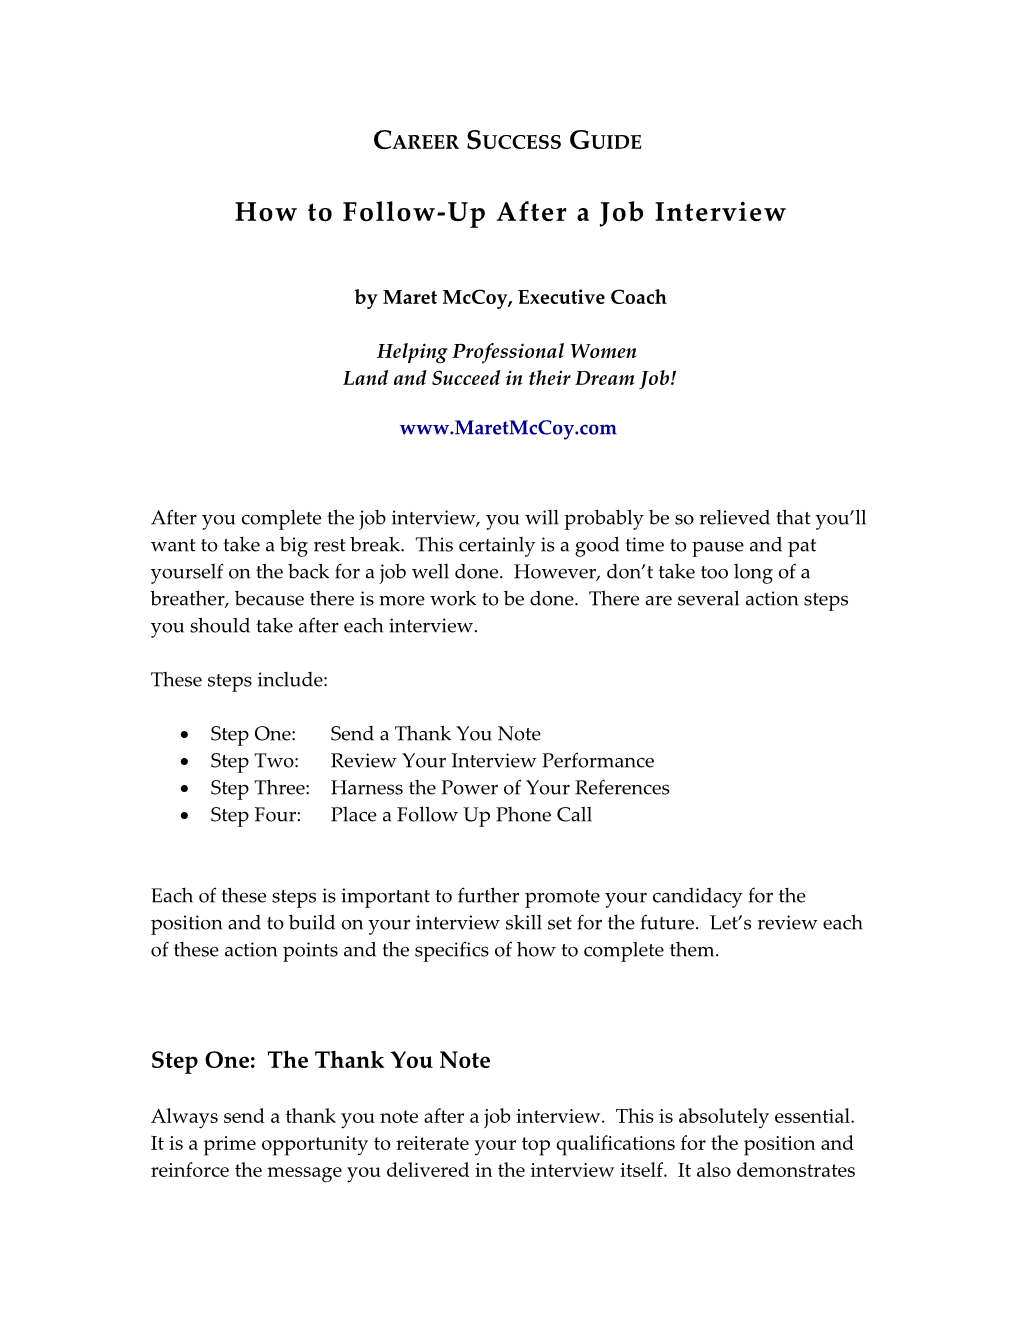 After the Interview How to Follow-Up